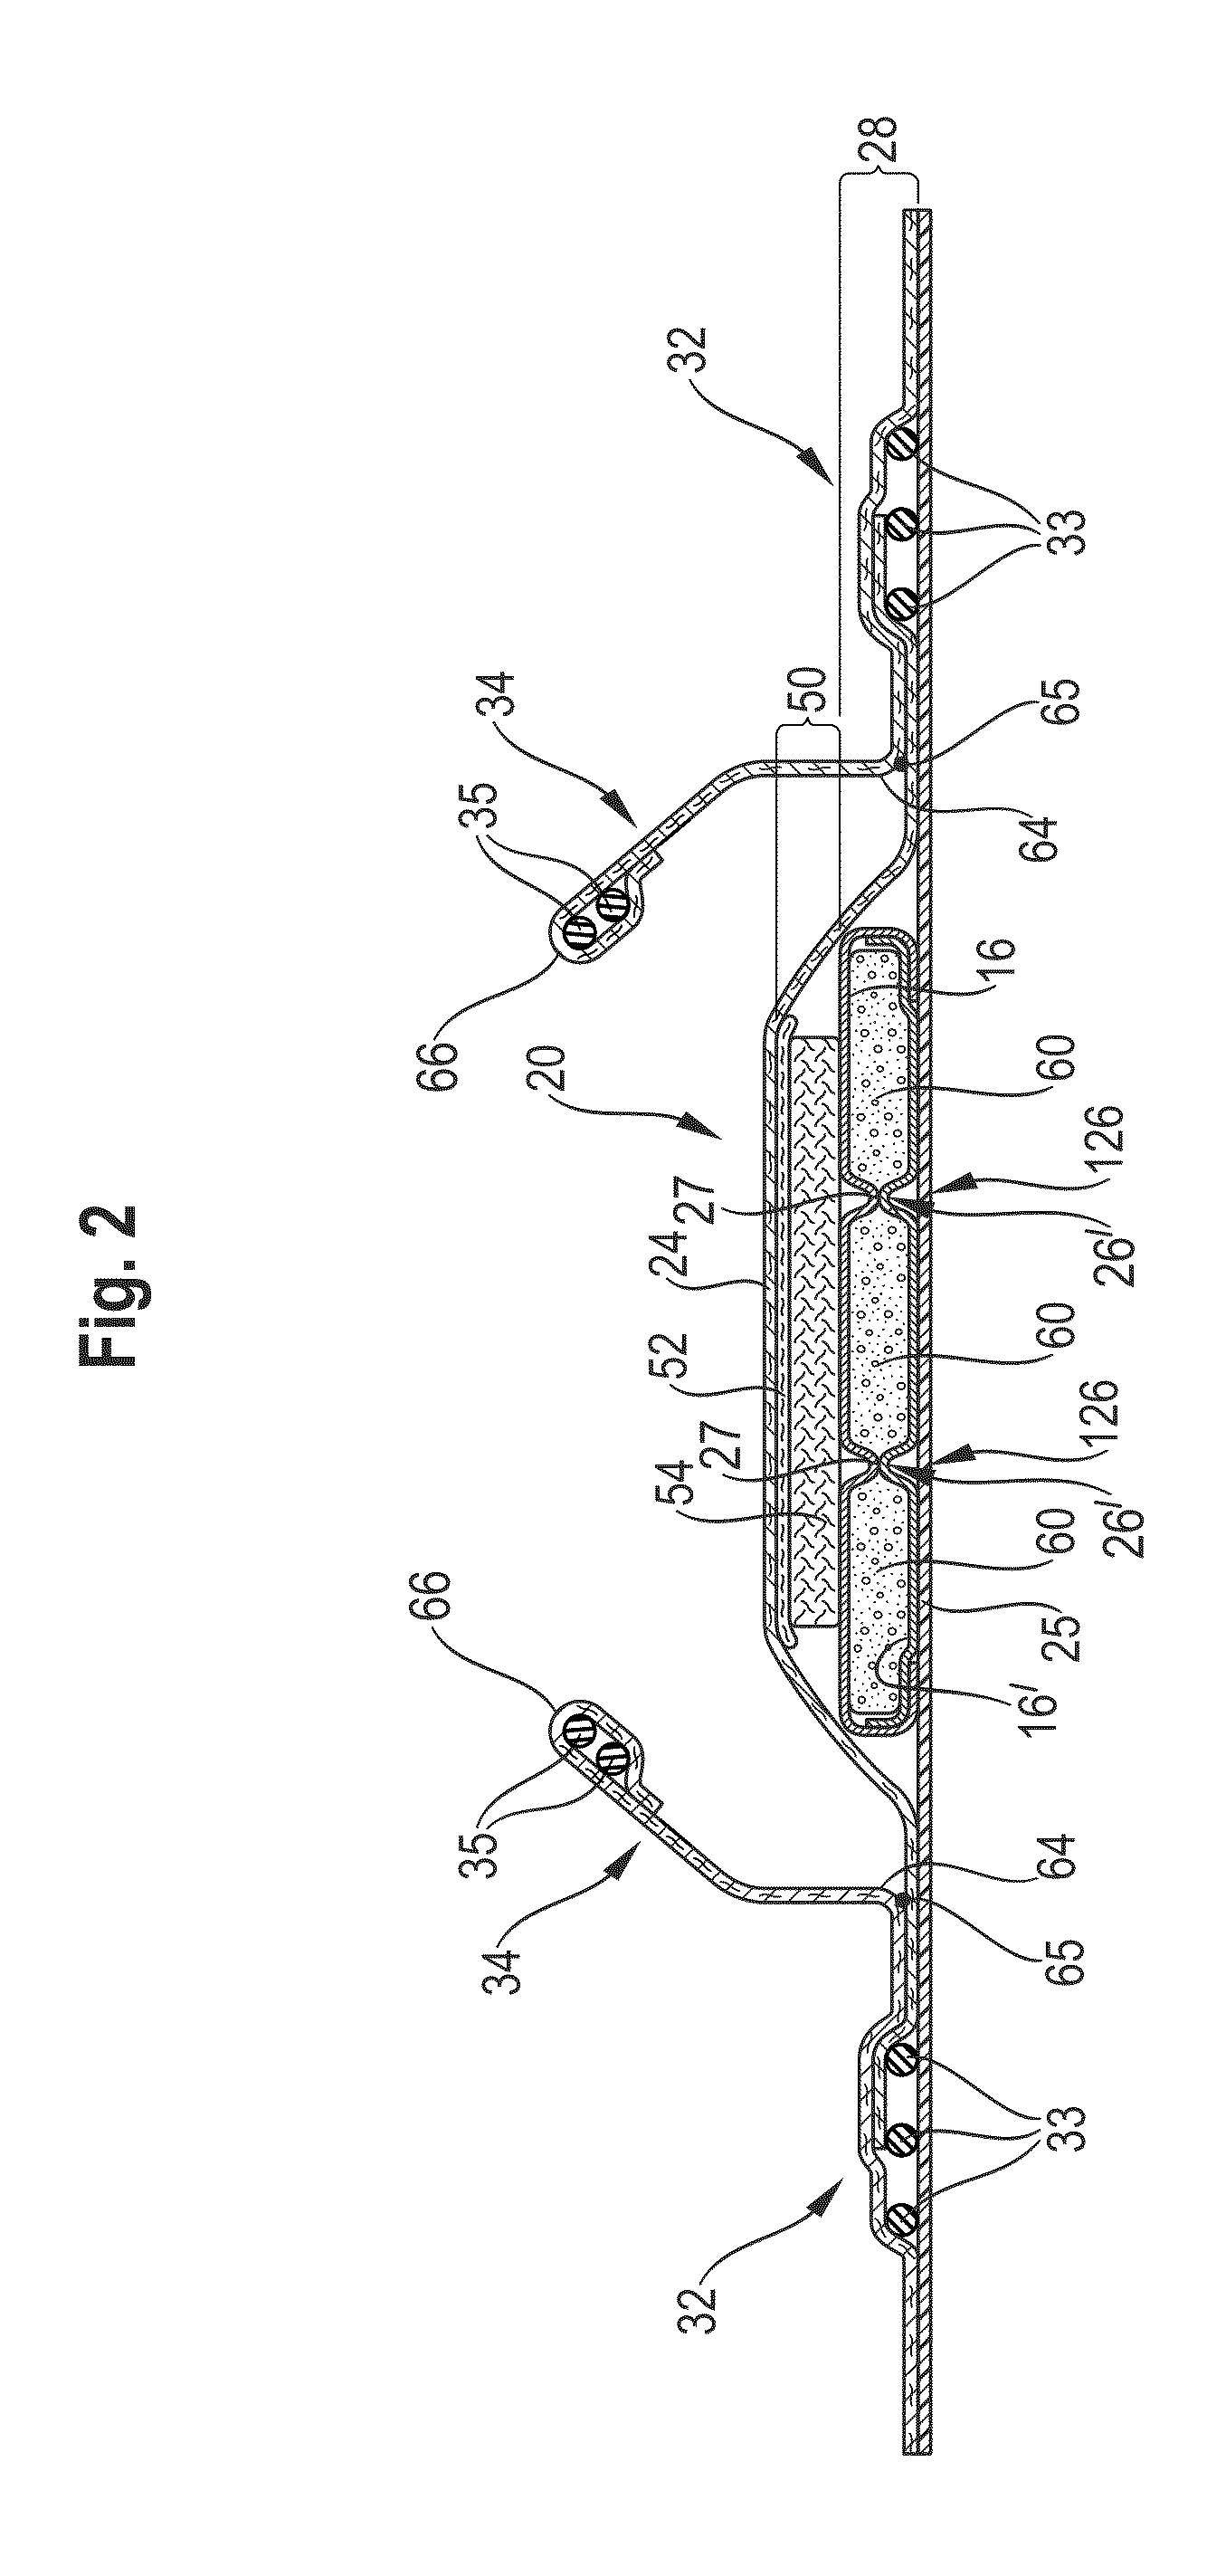 Absorbent article comprising one or more colored areas